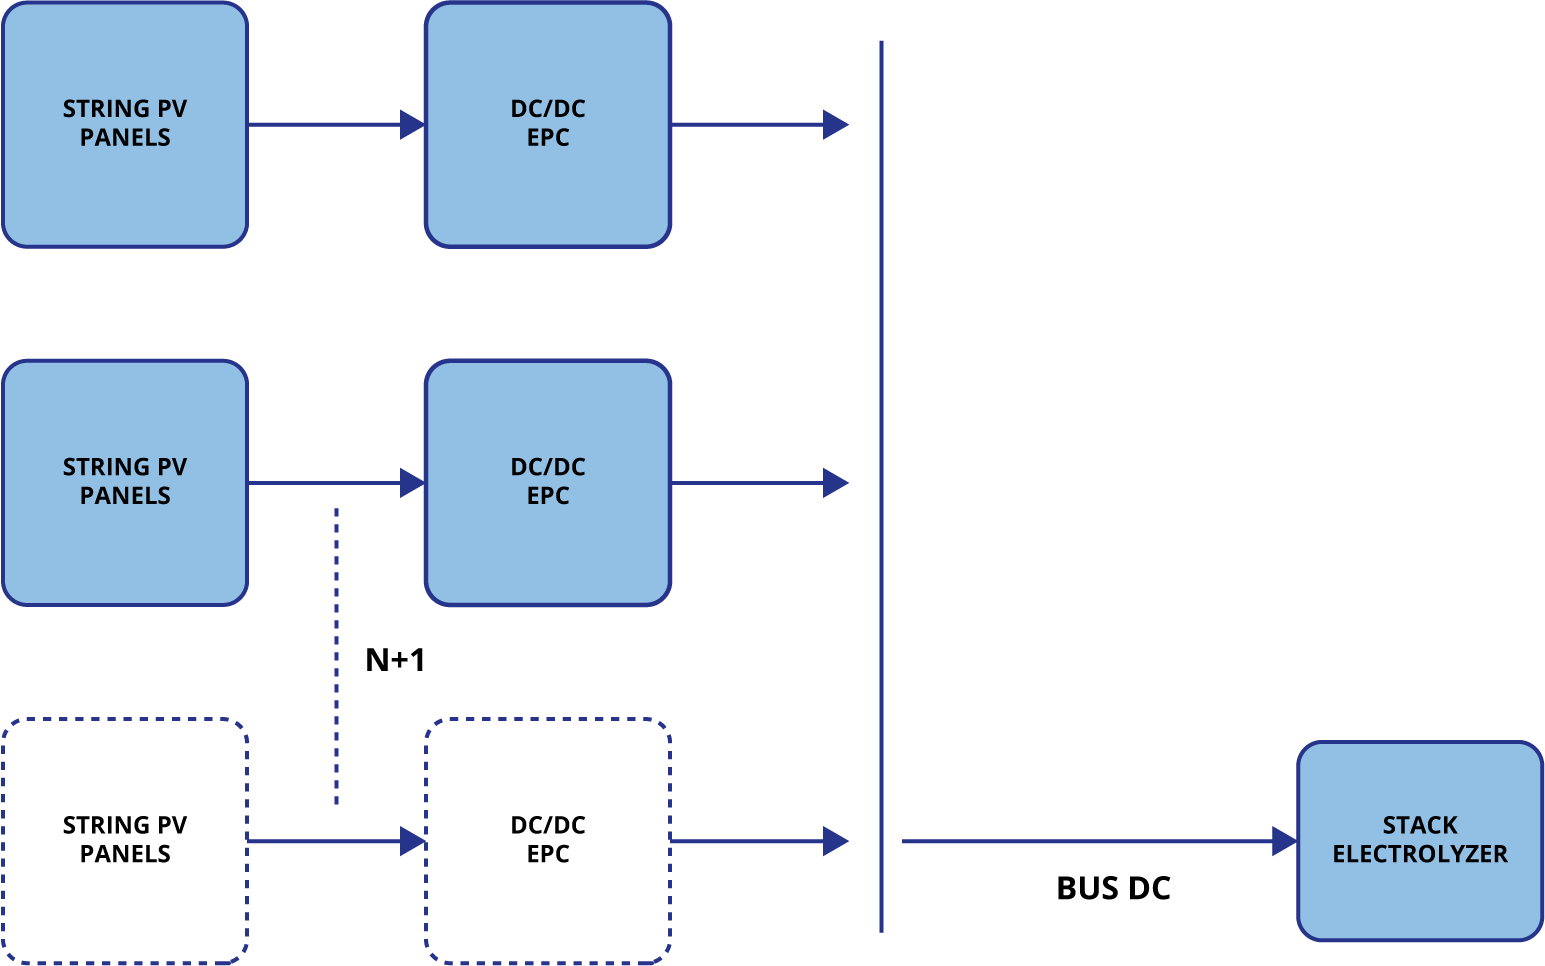 DC/DC converter per string connected directly to electrolyzer stack